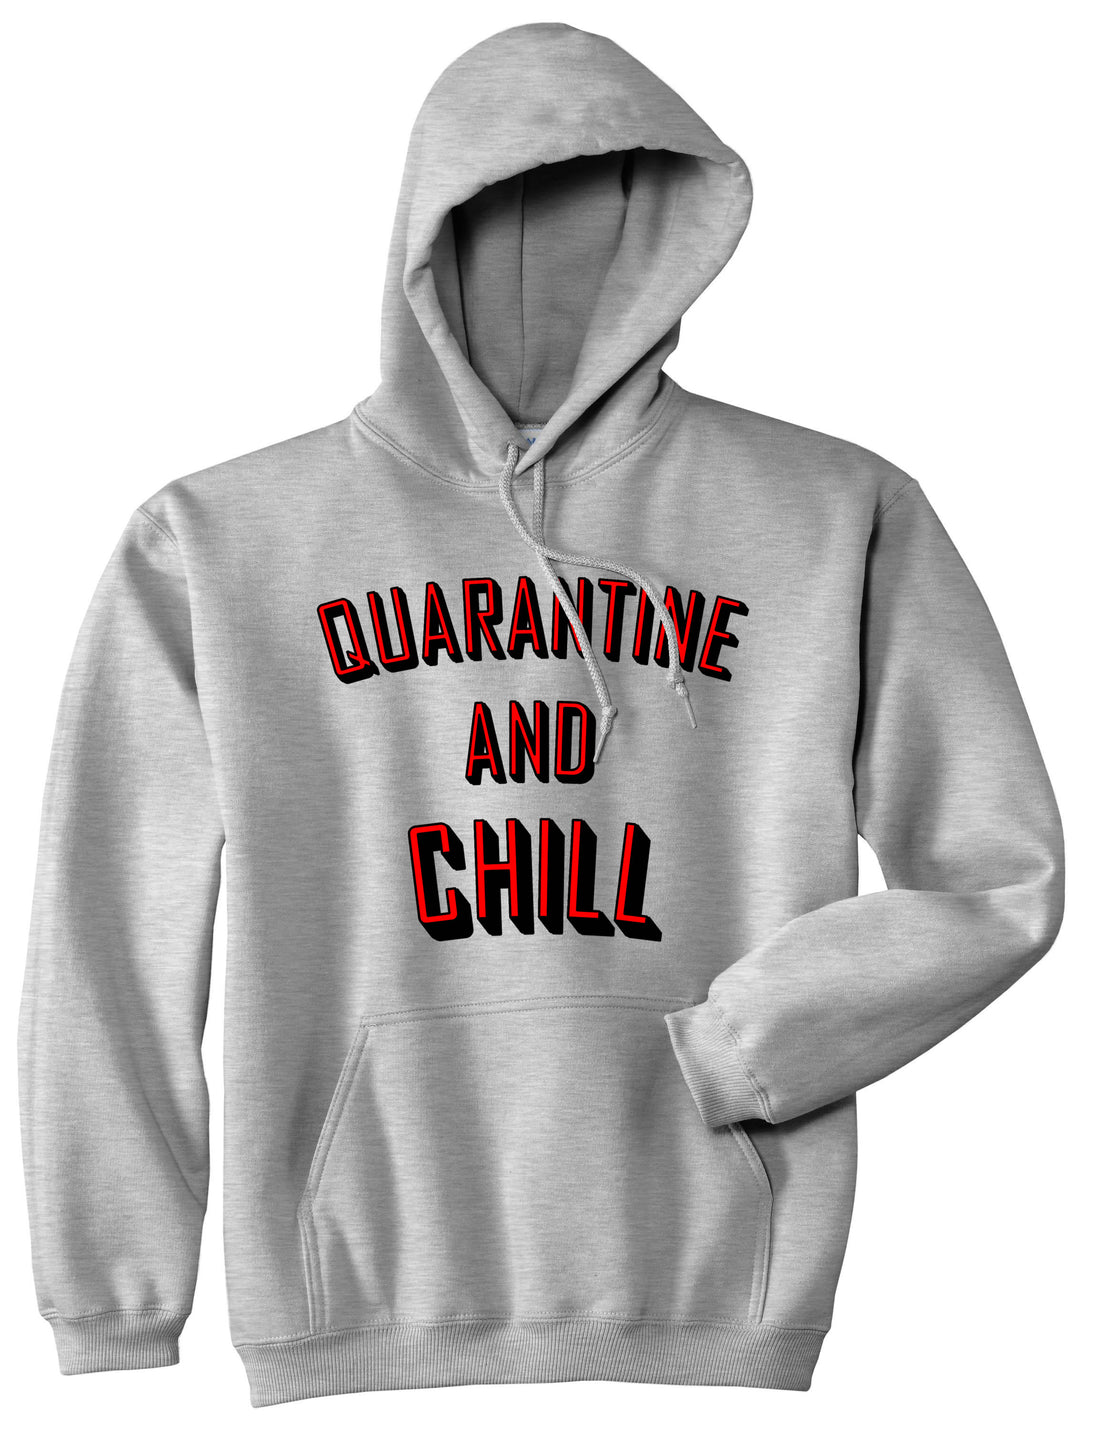 Quarantine And Chill Funny Meme Pullover Hoodie Grey